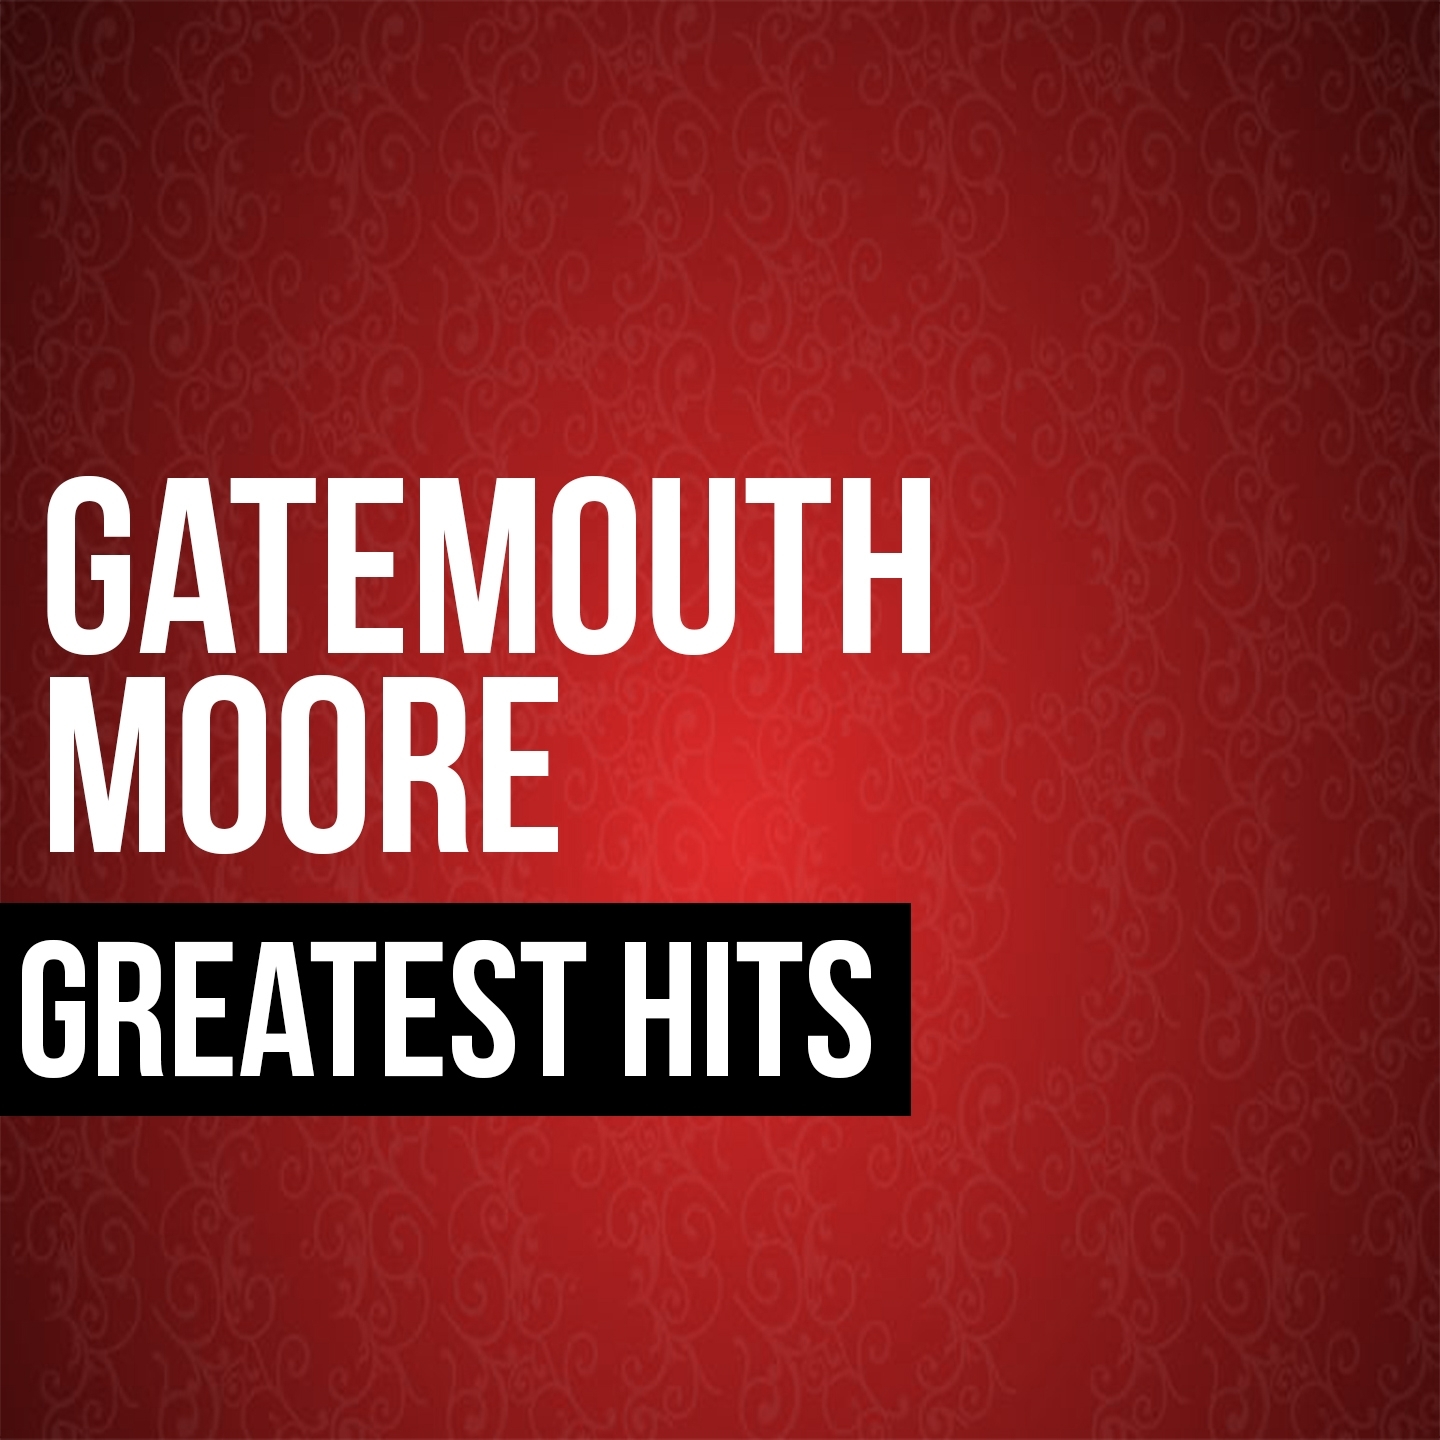 Gatemouth Moore Greatest Hits